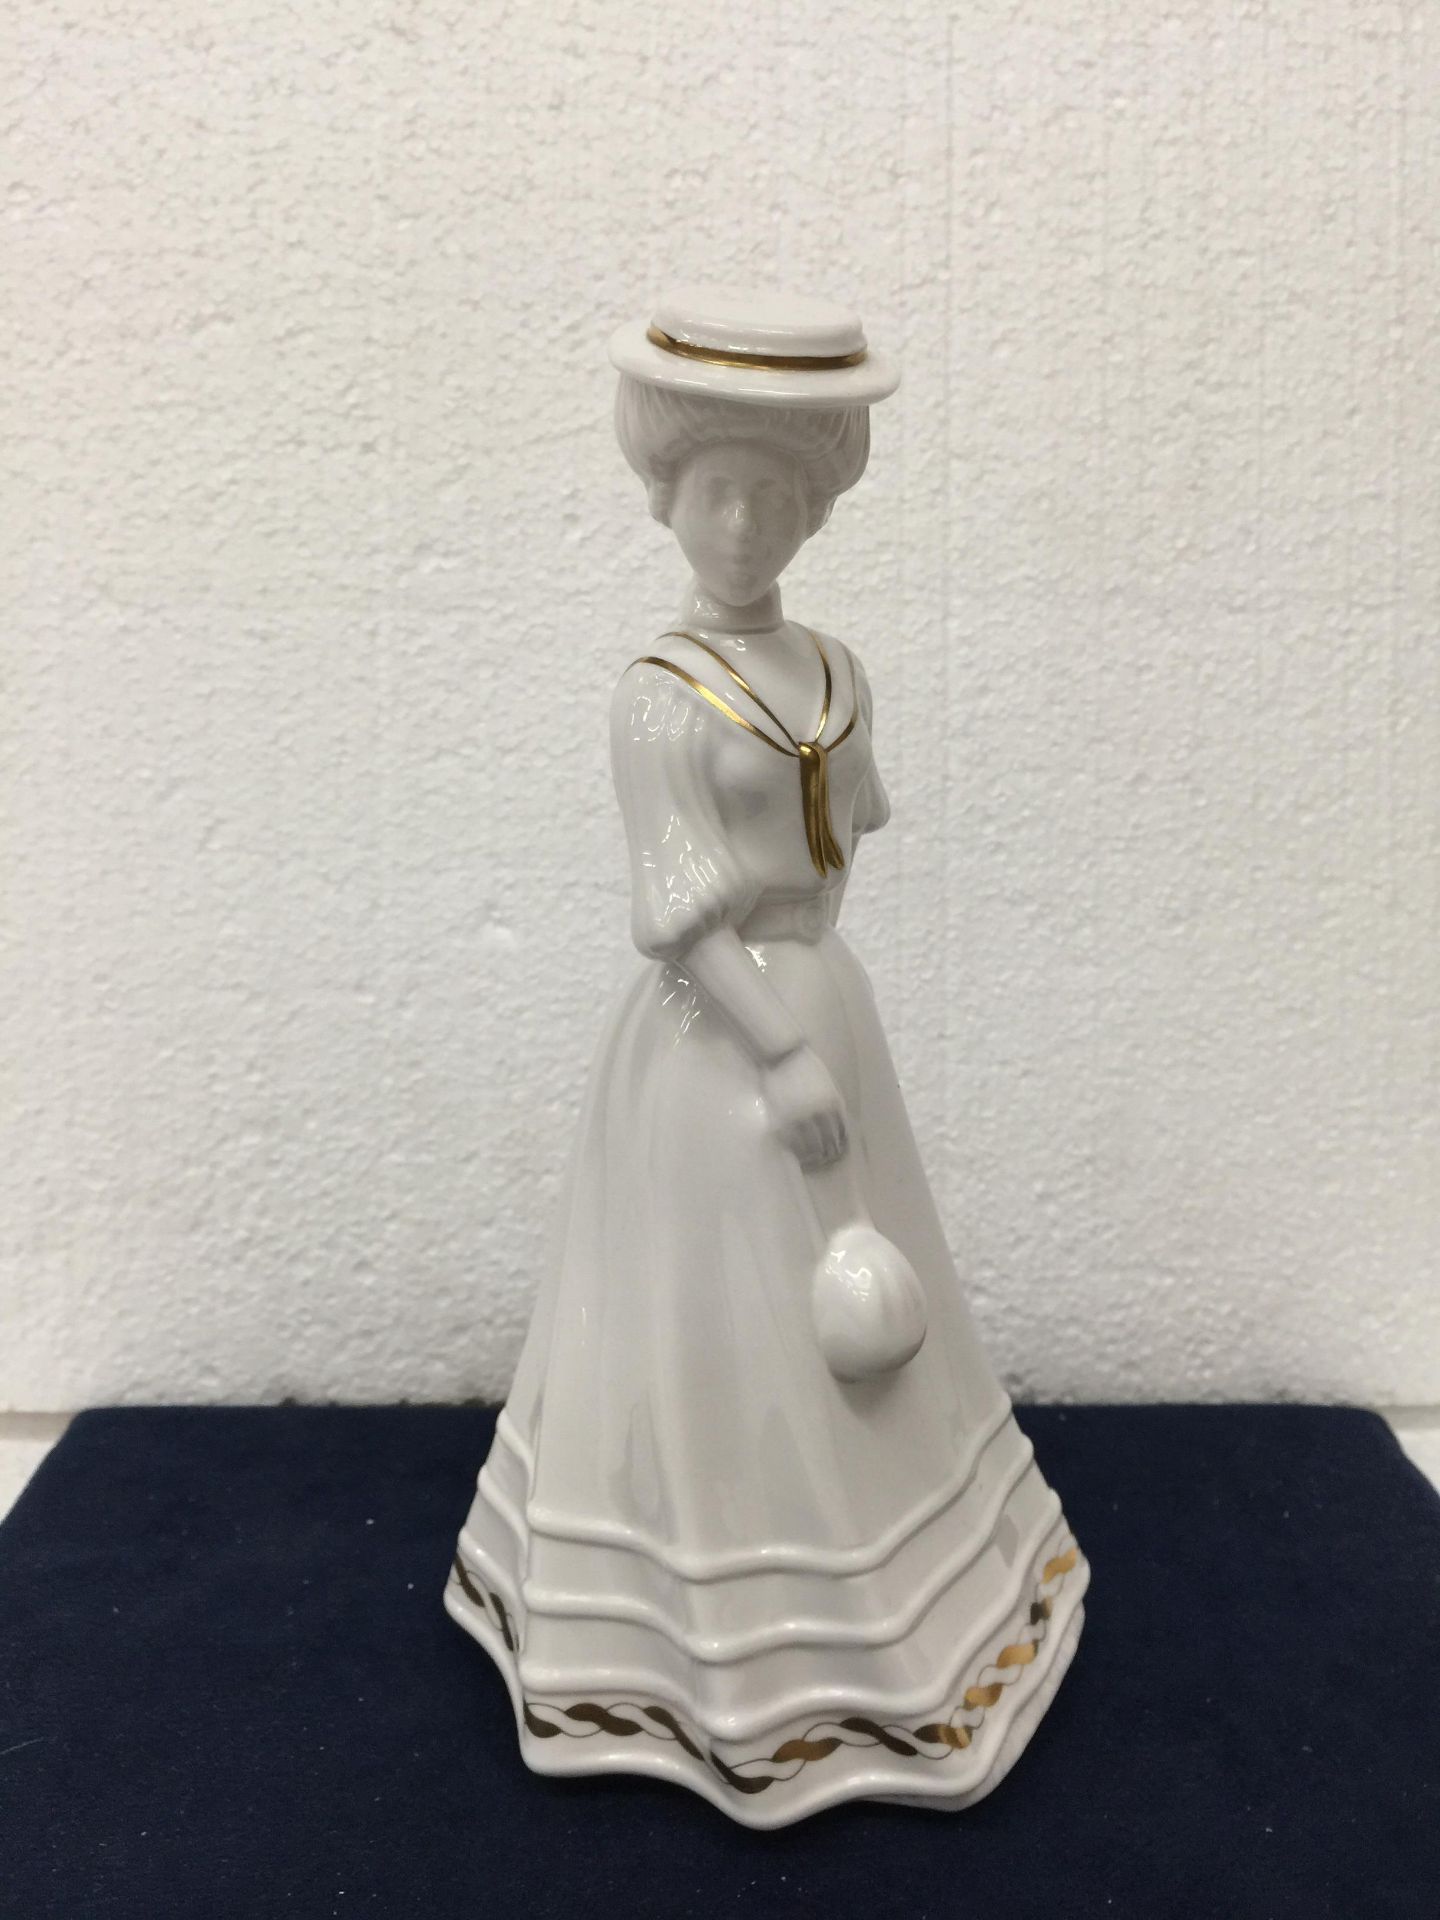 A SPODE FIGURINE "LILY" BY PAULINE SHONE IN GLOSS - 24CM (H) - Image 2 of 7